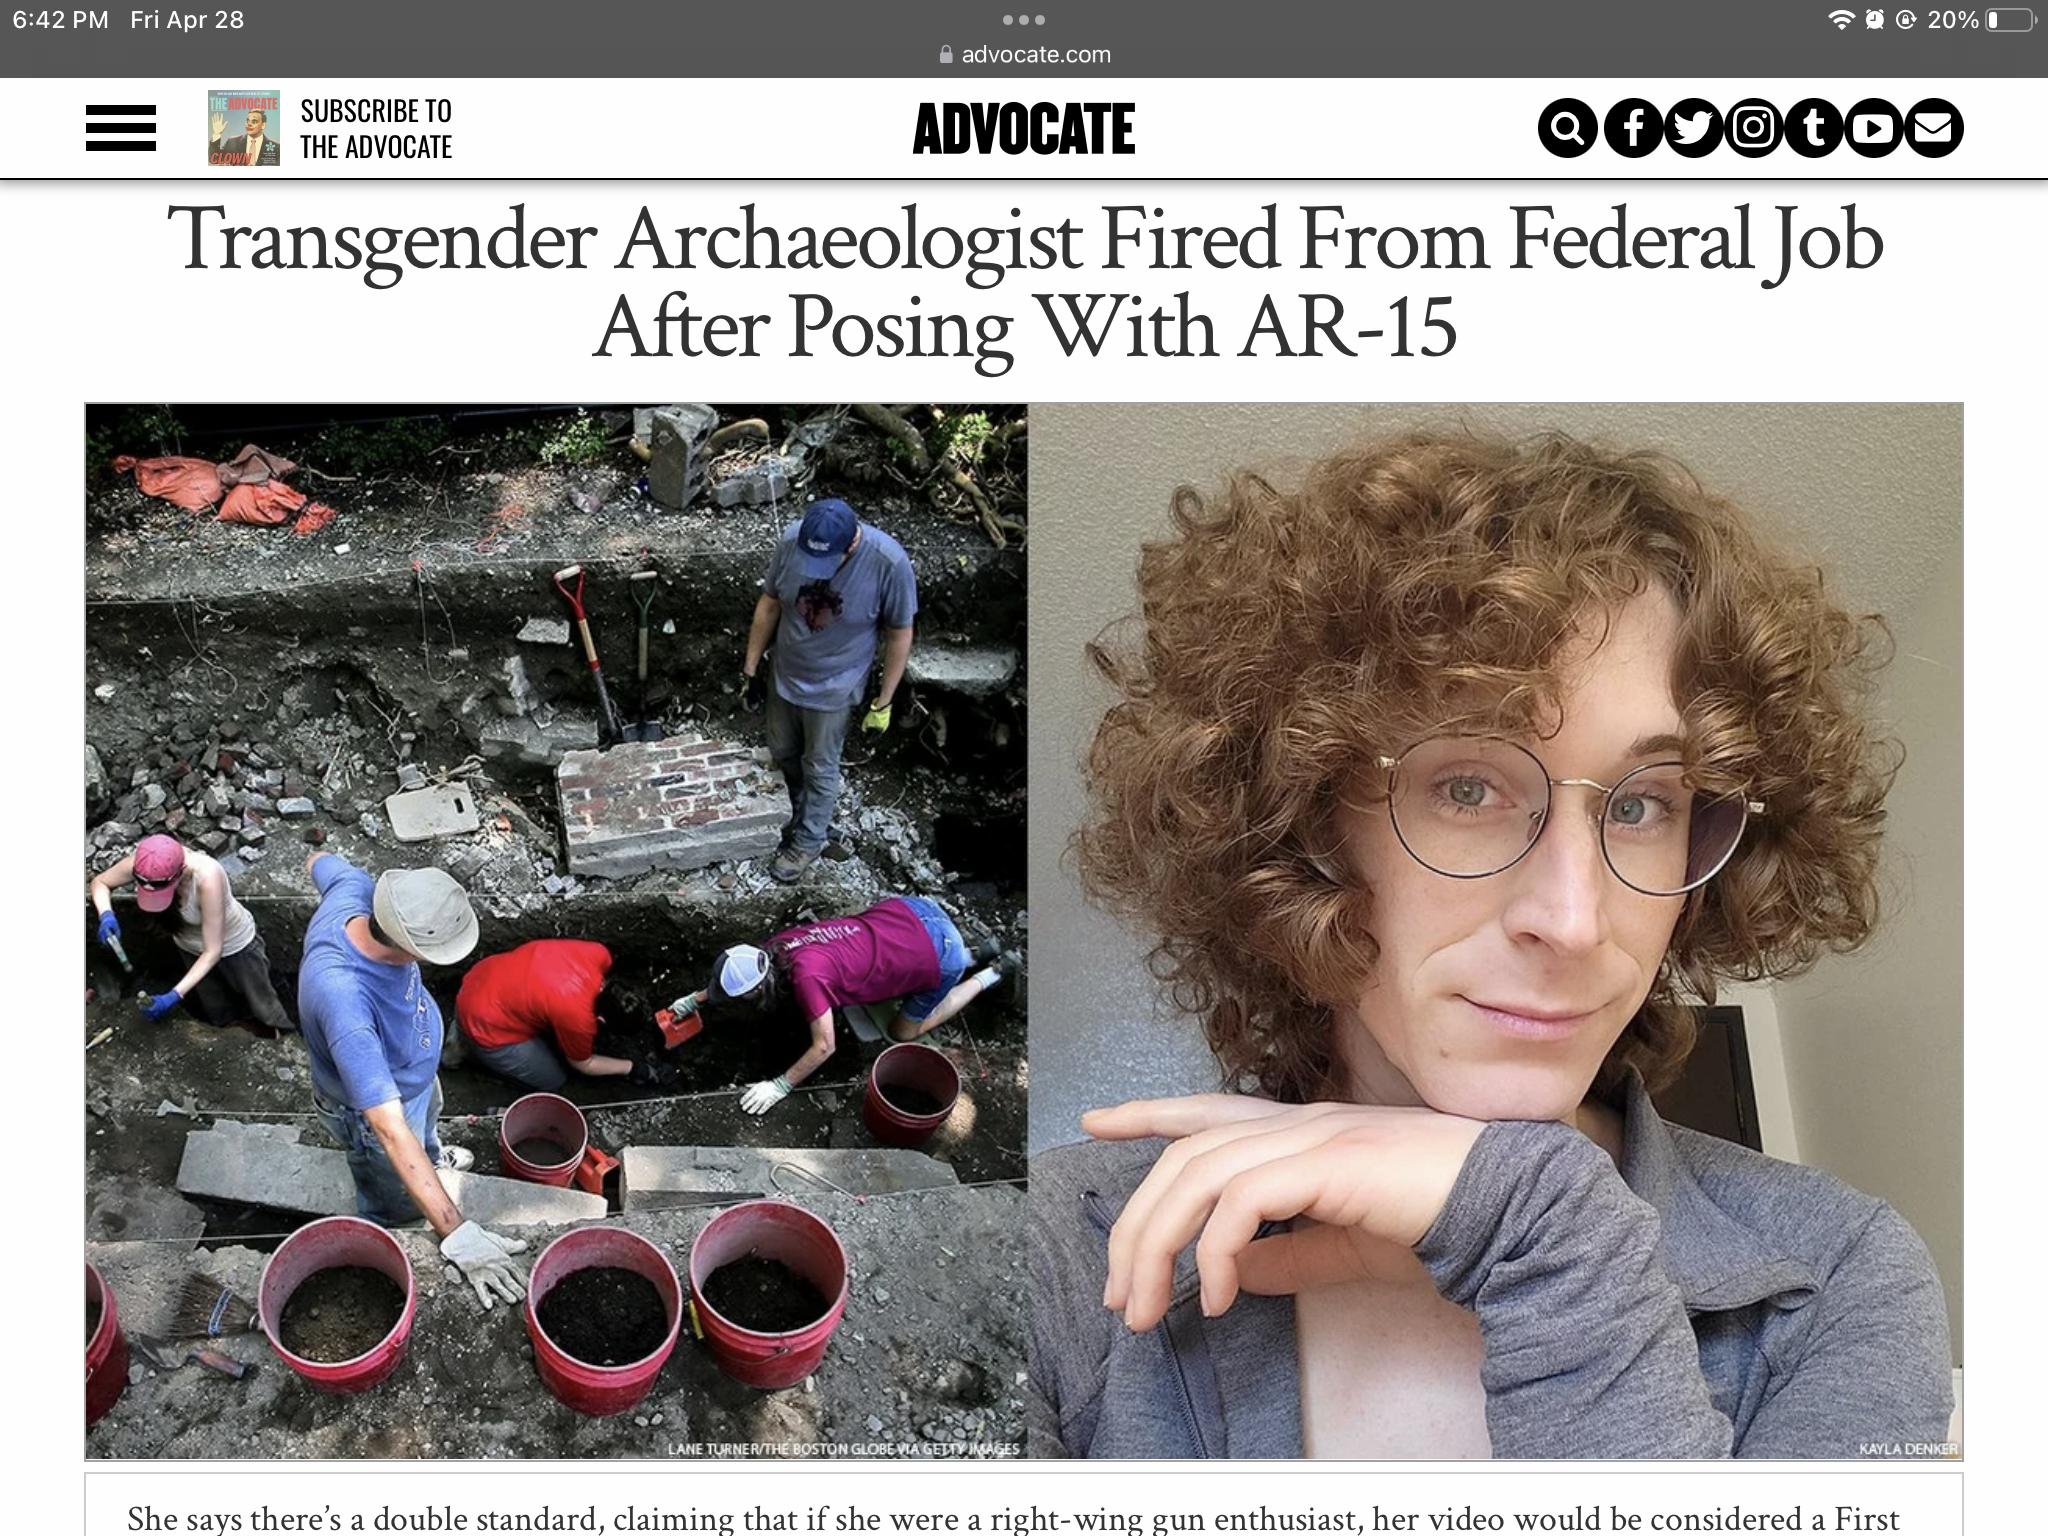 Transgender Archaeologist Fired From Federal Job After Posing With AR-15 https://www.indicate.com/info/transgender-lady-fired-federal-gun